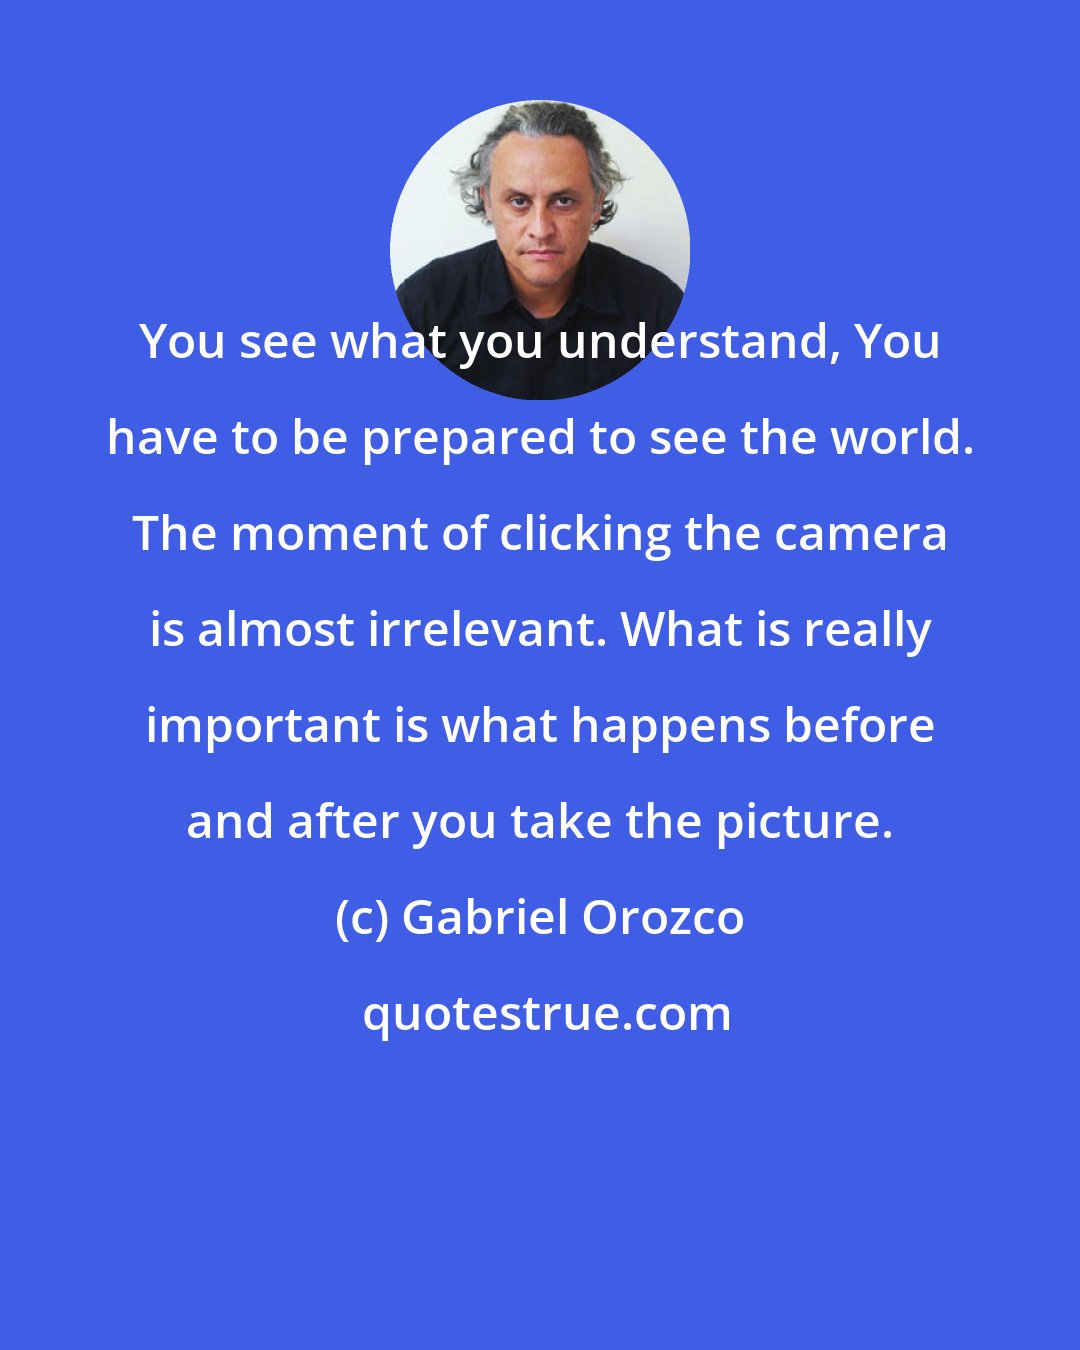 Gabriel Orozco: You see what you understand, You have to be prepared to see the world. The moment of clicking the camera is almost irrelevant. What is really important is what happens before and after you take the picture.